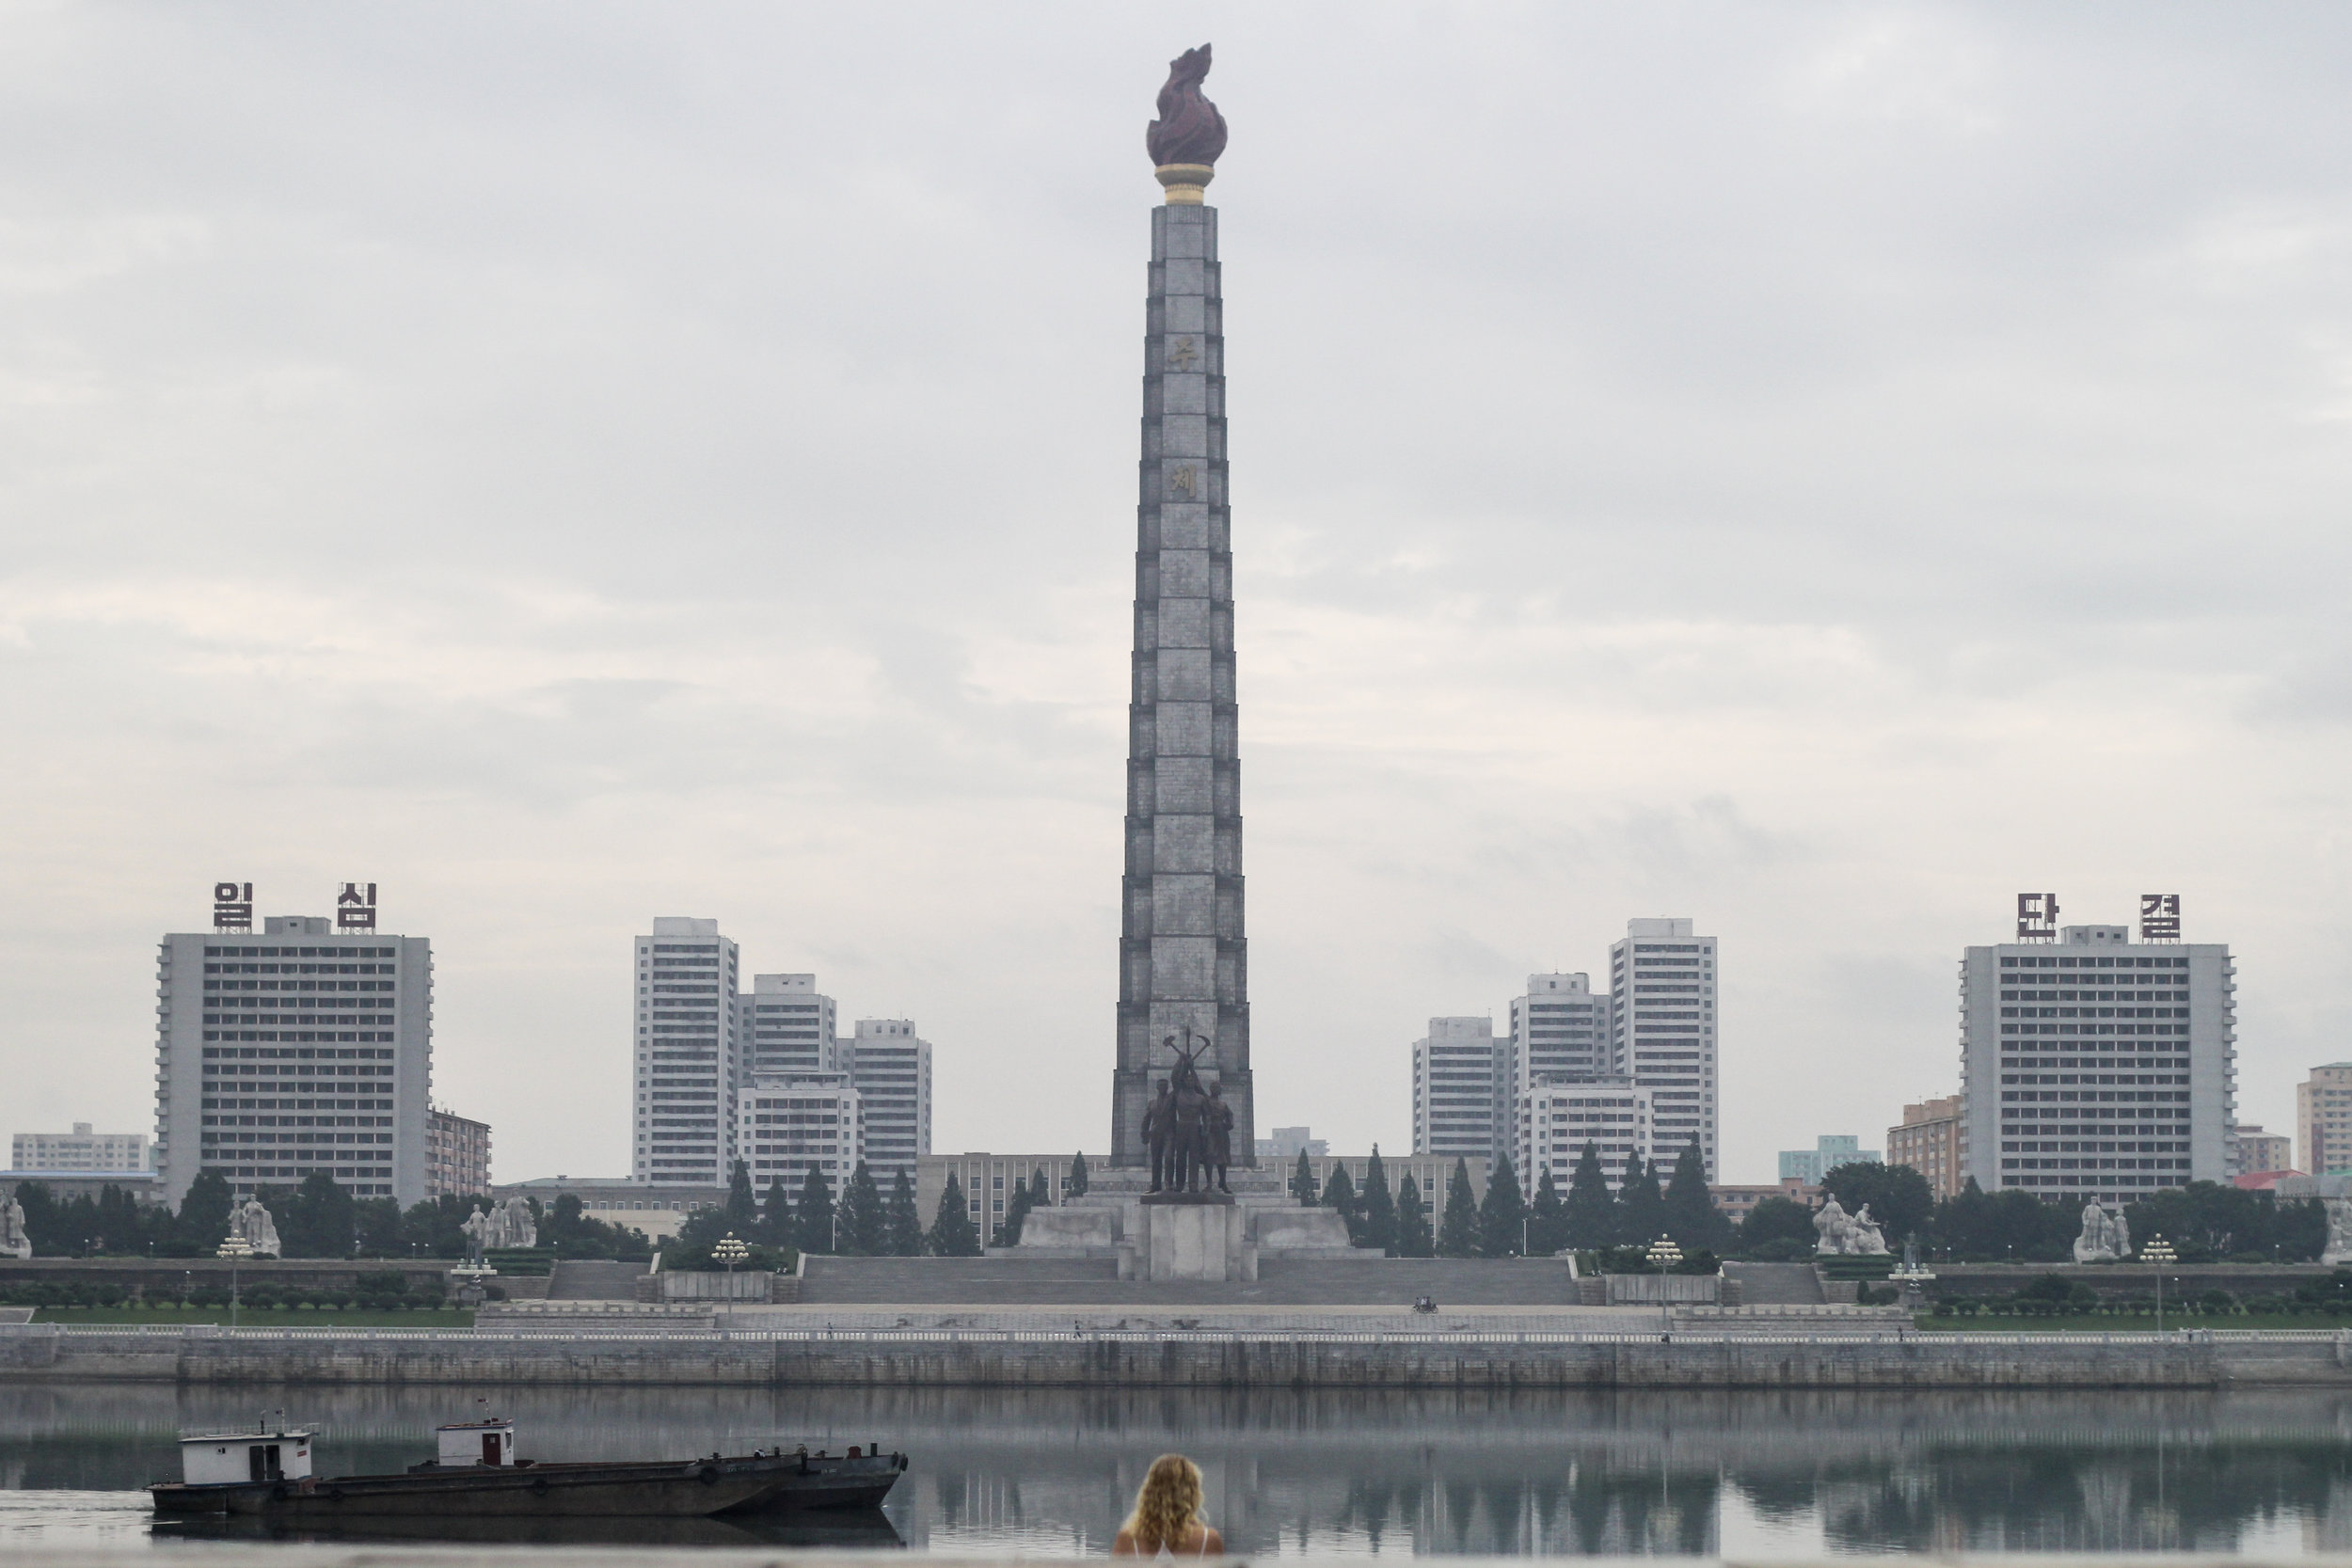  Pyongyang has lot's and lot's of wild monuments. 